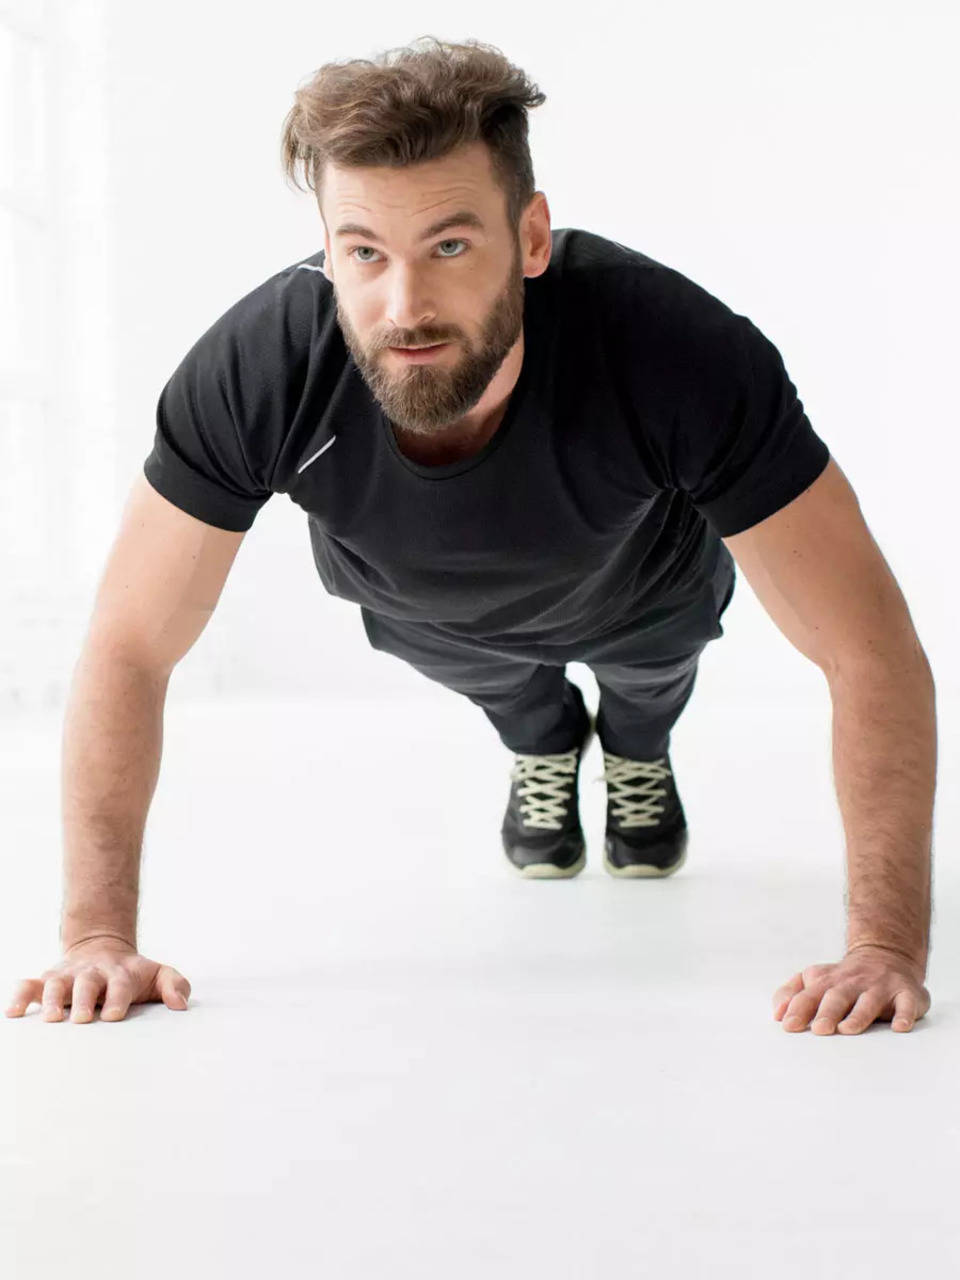 exercise tips: How to master the pushup - The Economic Times